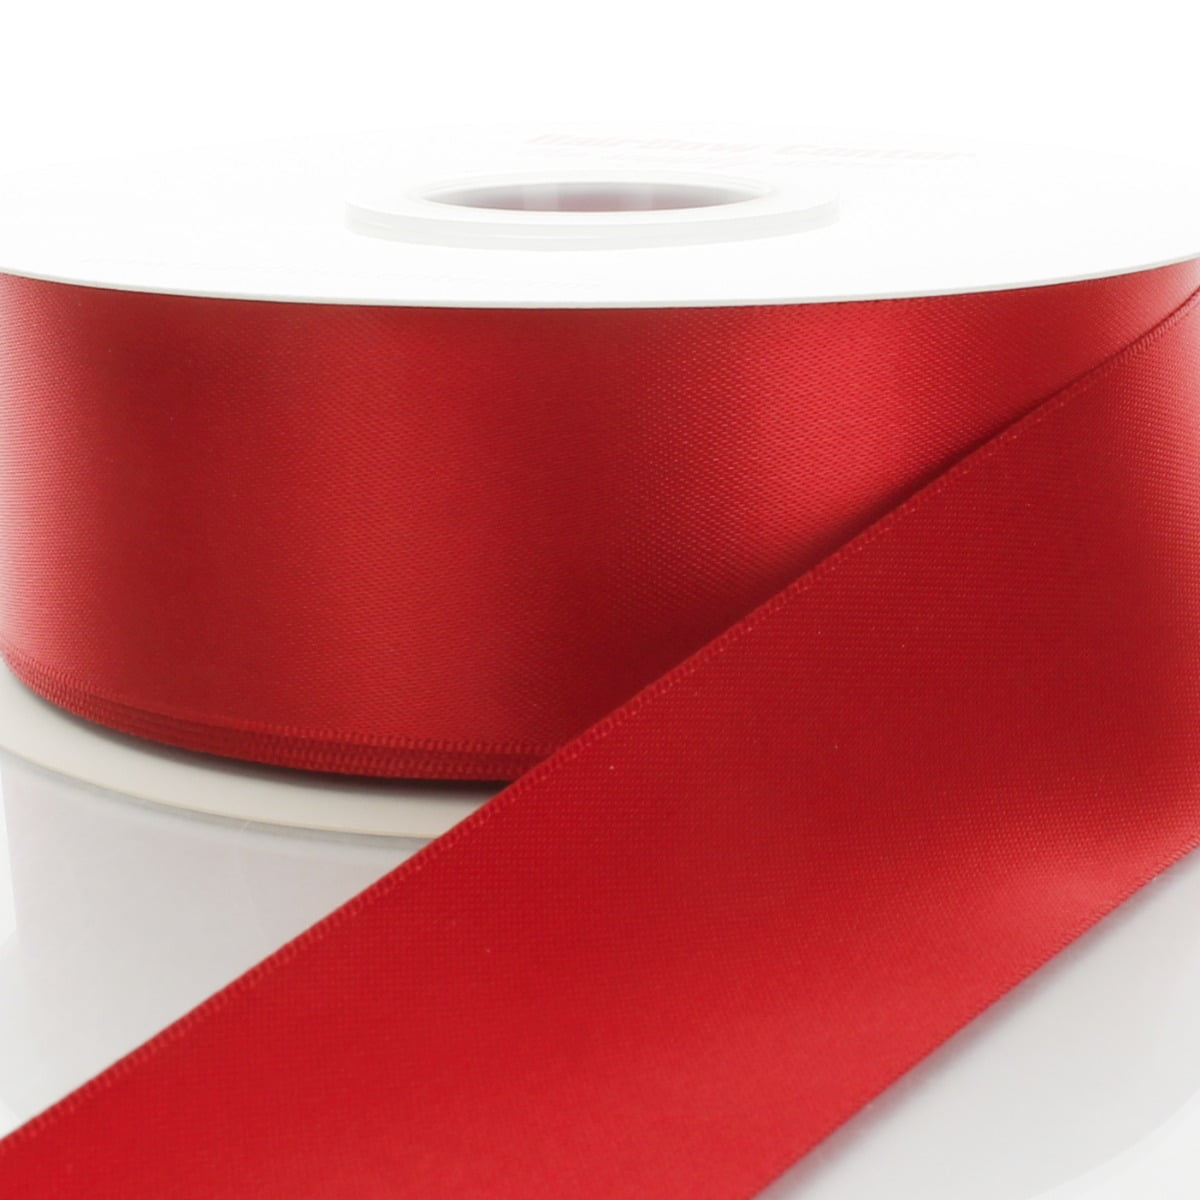 MUCHAO Supplies 1/2 Inches x 100 Yards Double Face Solid Satin Ribbon Roll (Red)